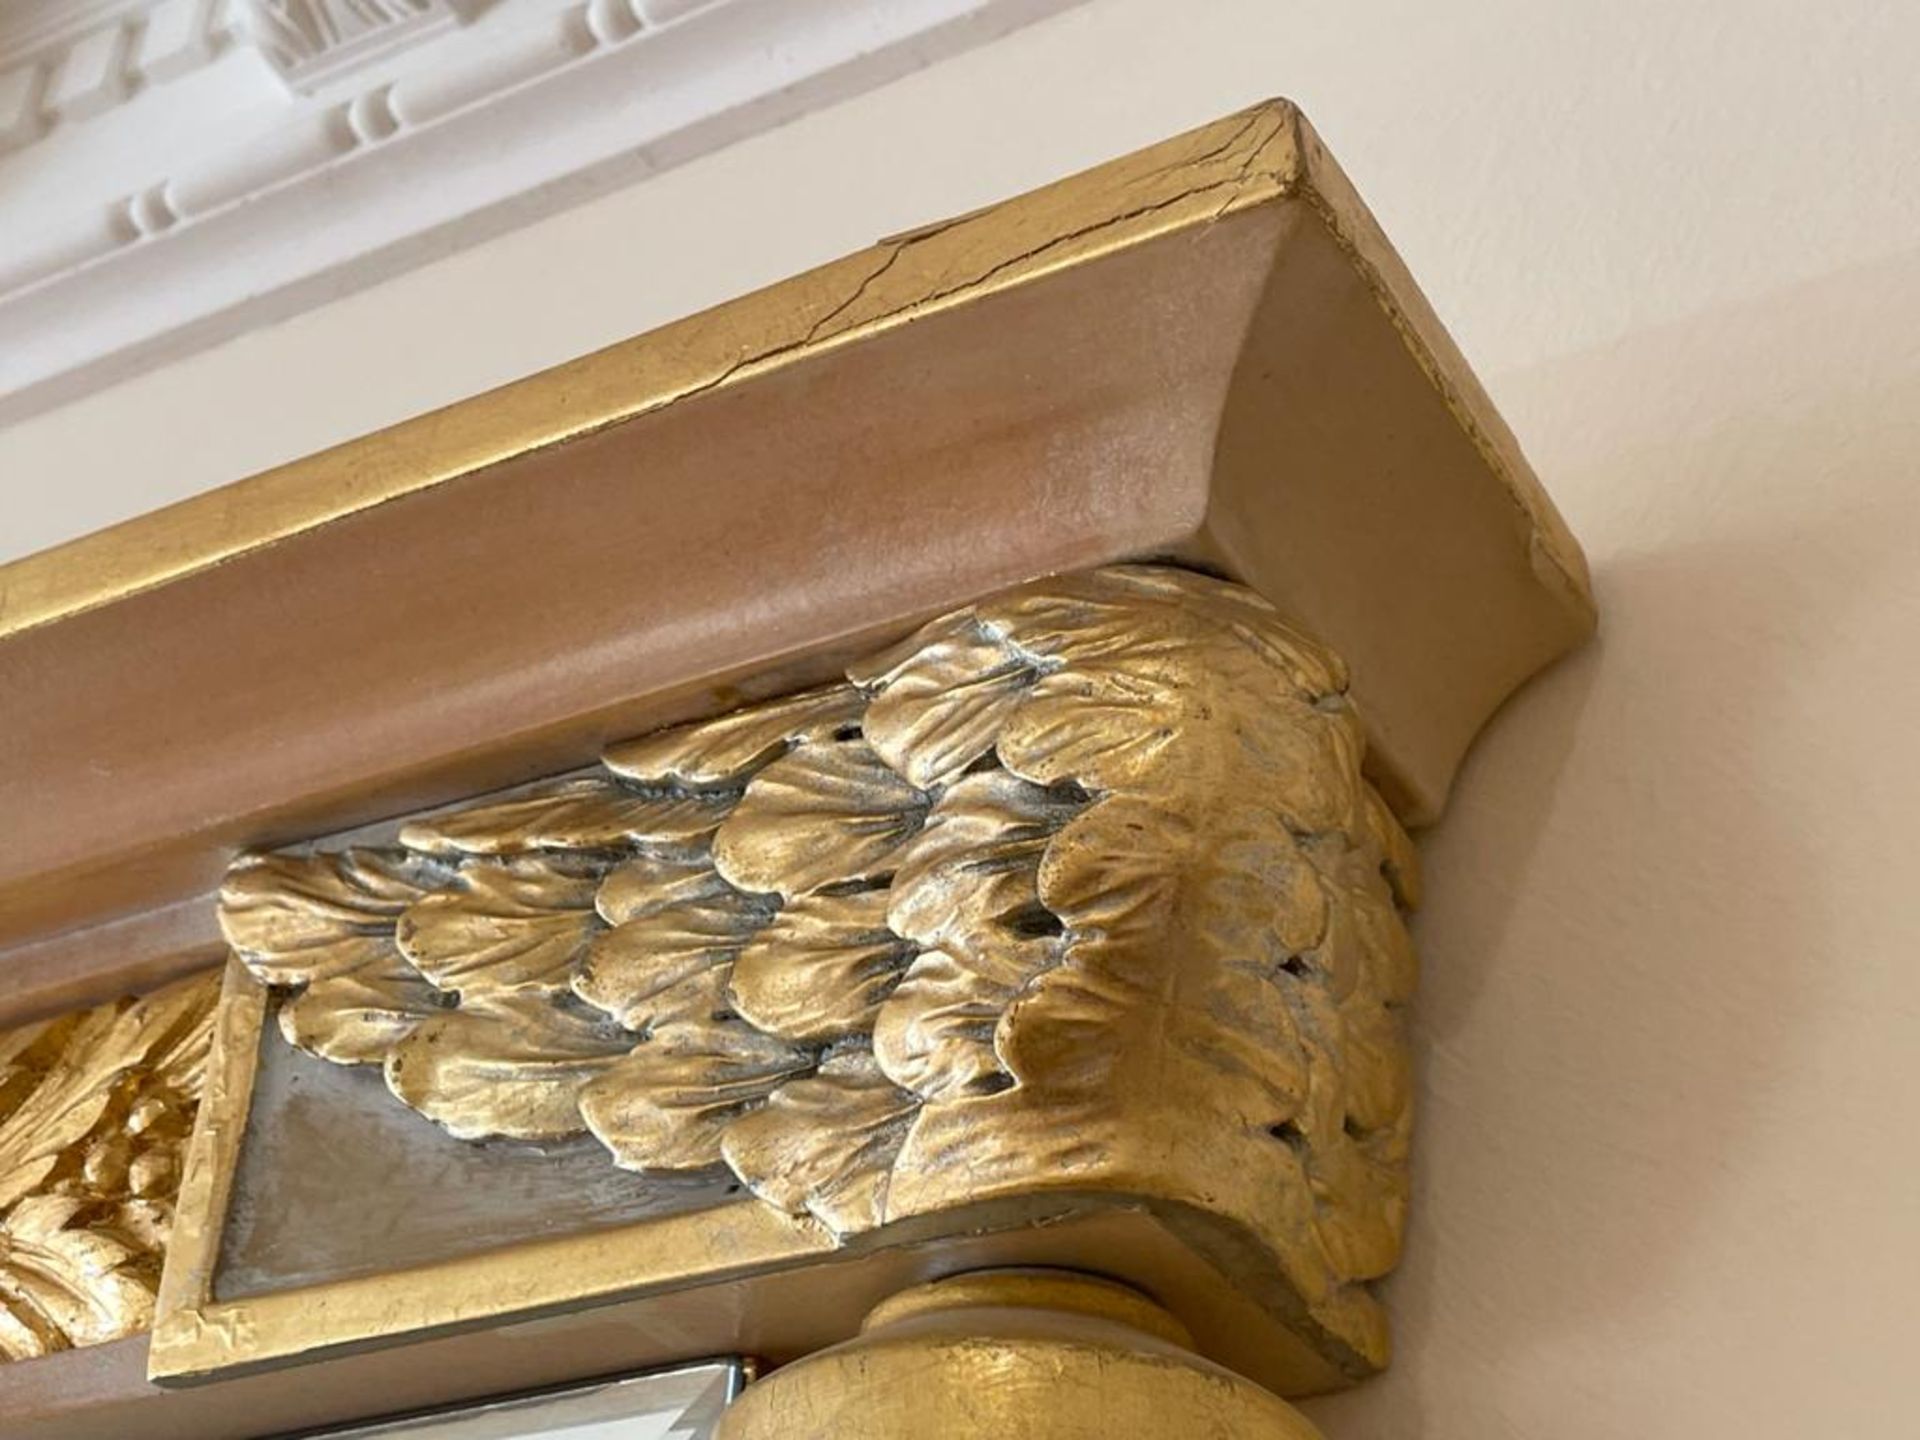 1 x Ornate Overmantel Wall Mirror With Fine Carving Work and Moulded Cornice - Features a Bevelled - Image 8 of 9